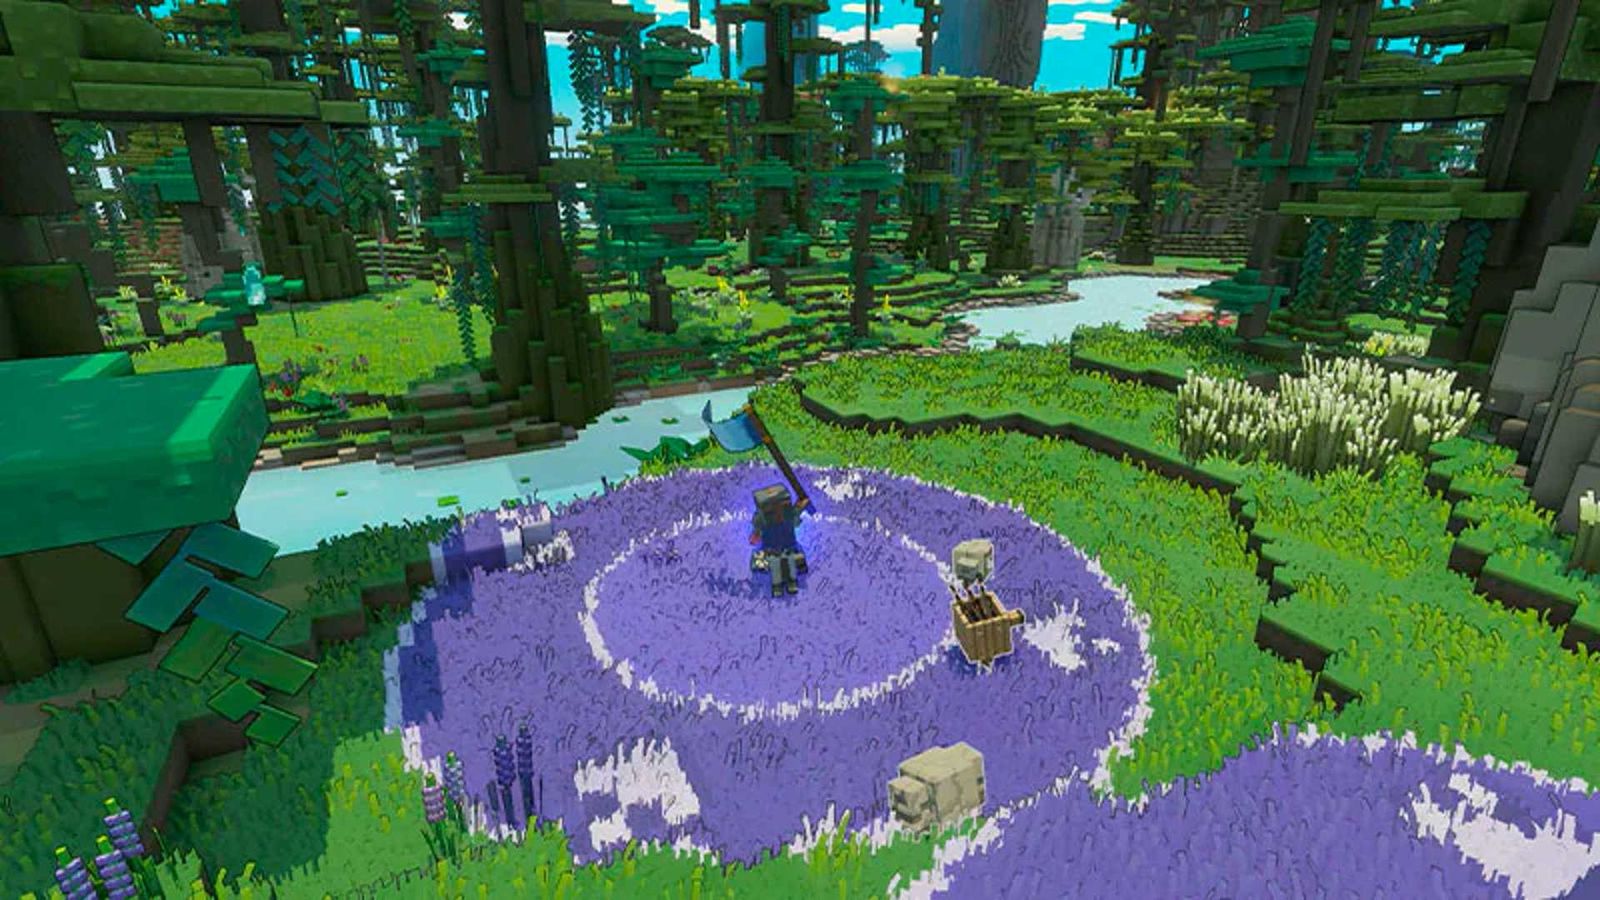 The player character within a purple zone in a forest in Minecraft Legends.